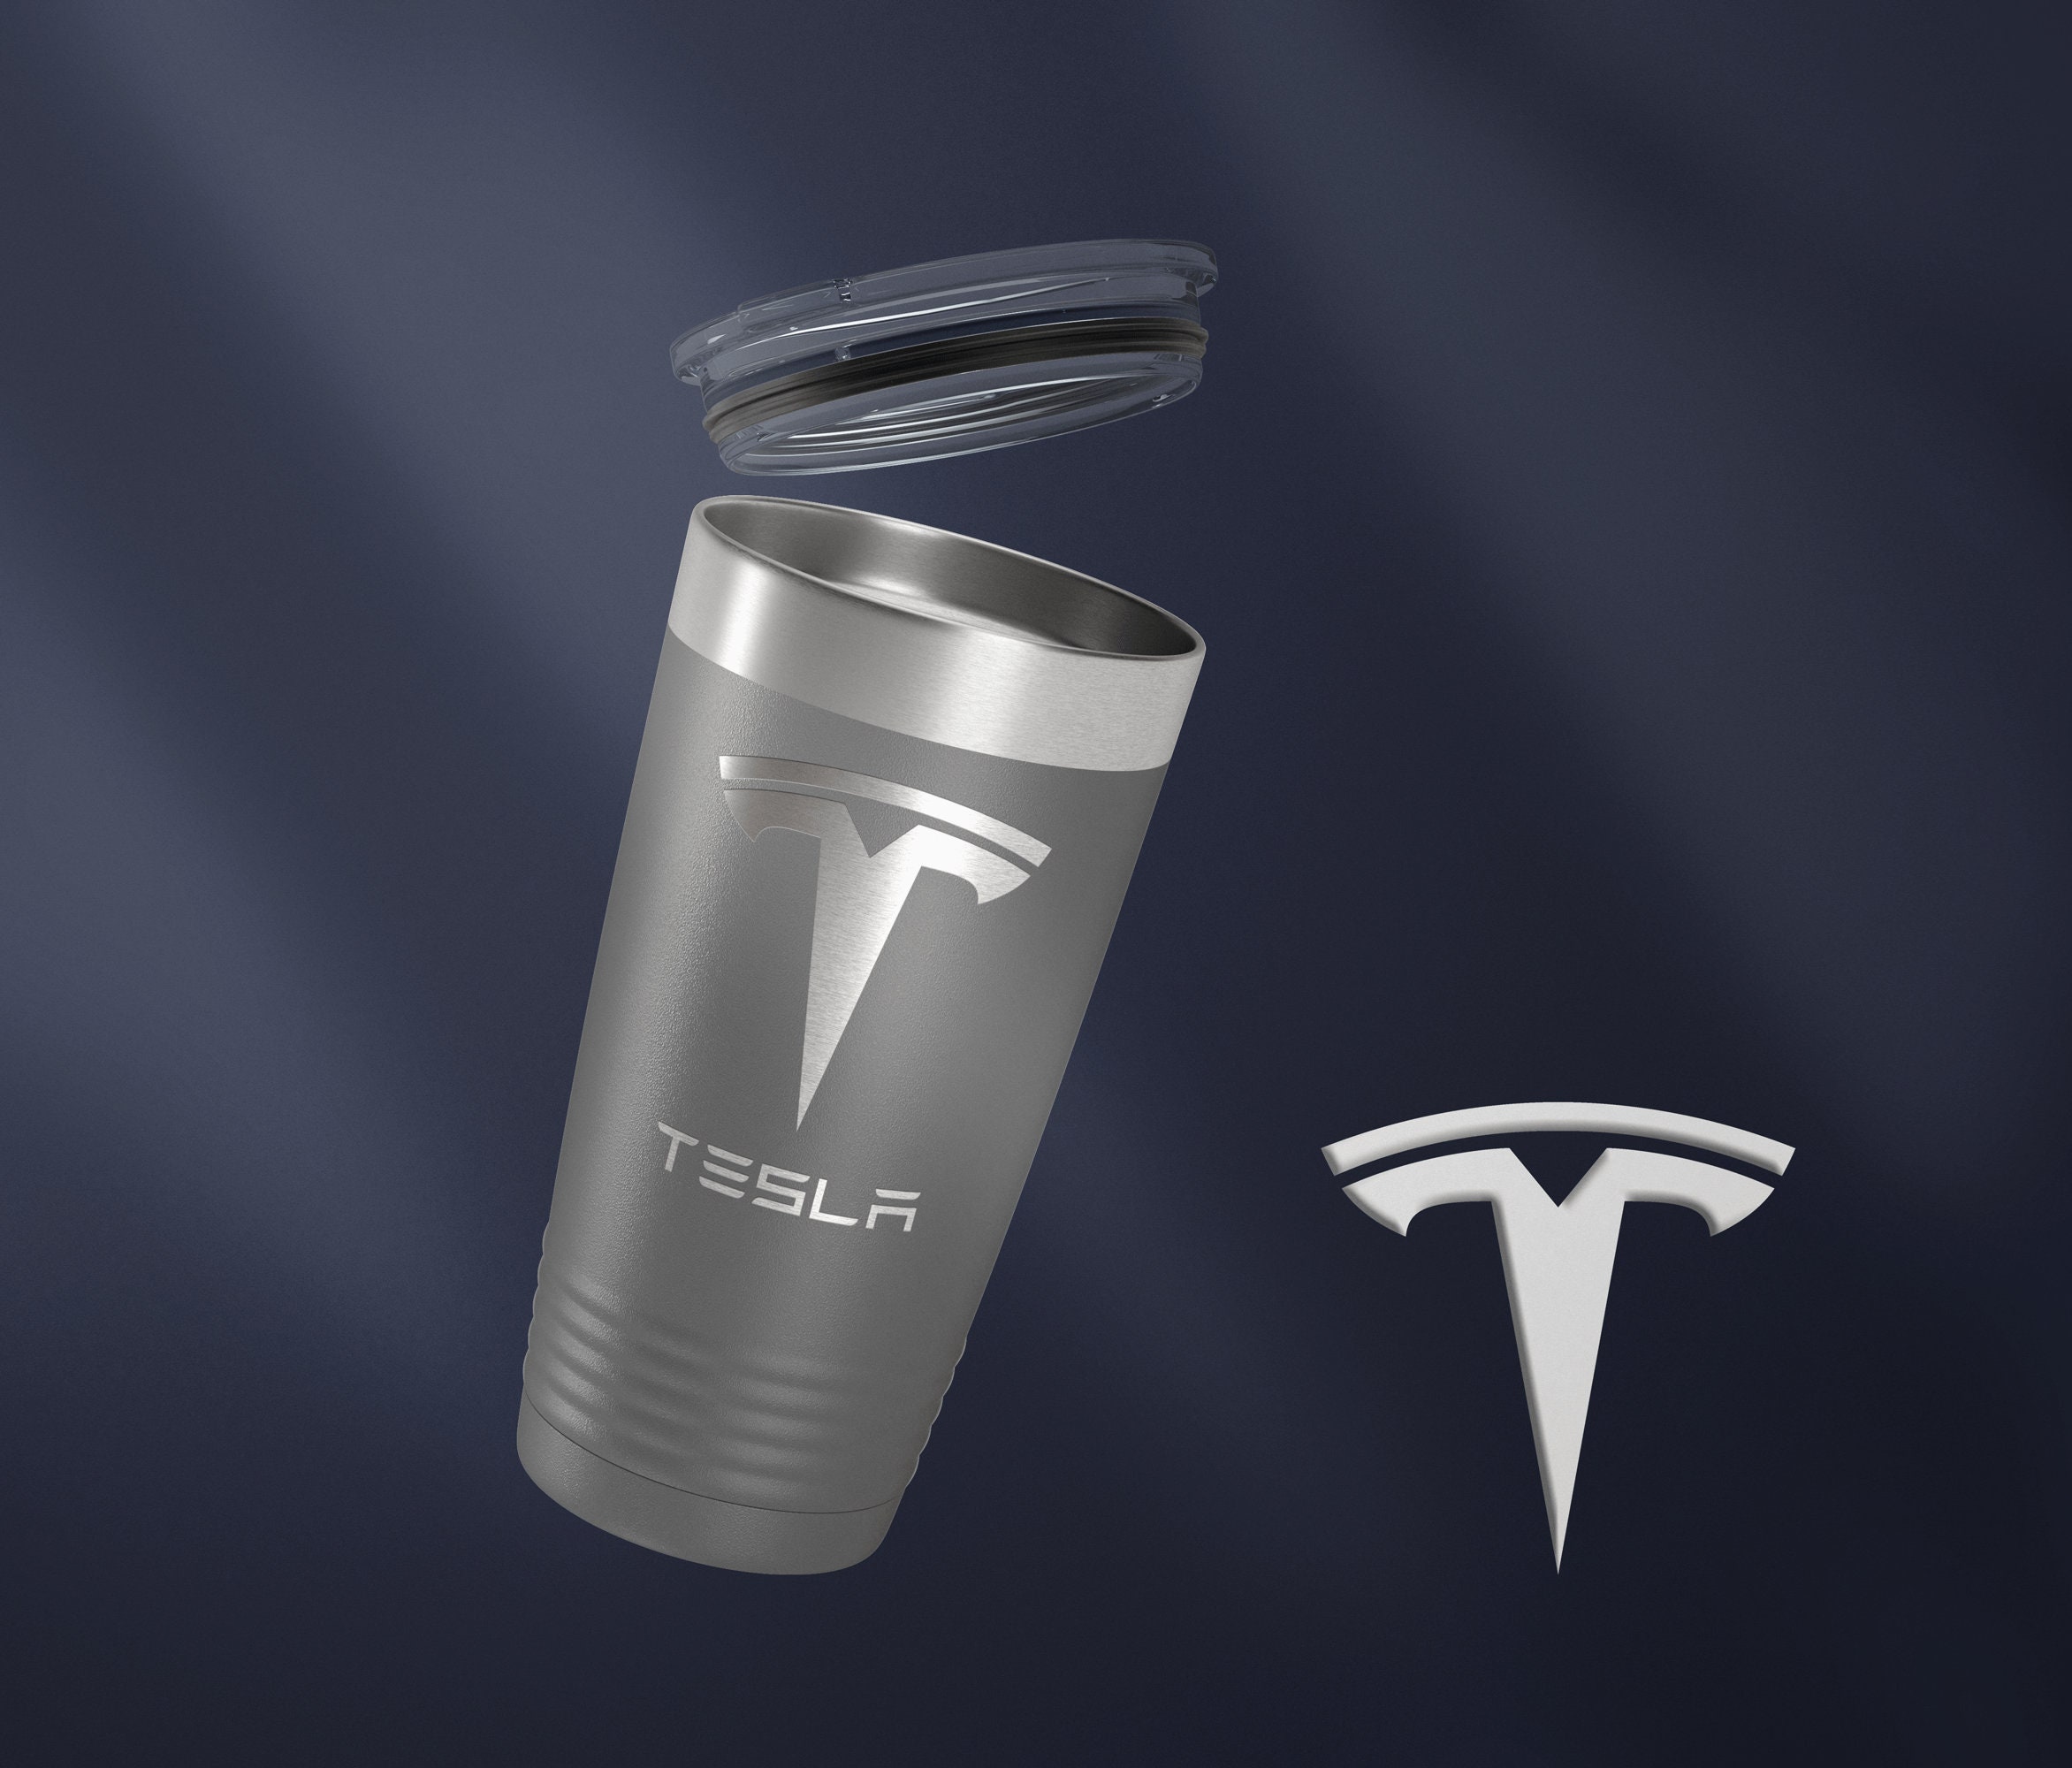 Tesla Coffee Tumbler Stainless Steel Insulated Hot & Cold With Straw Model  3 S X